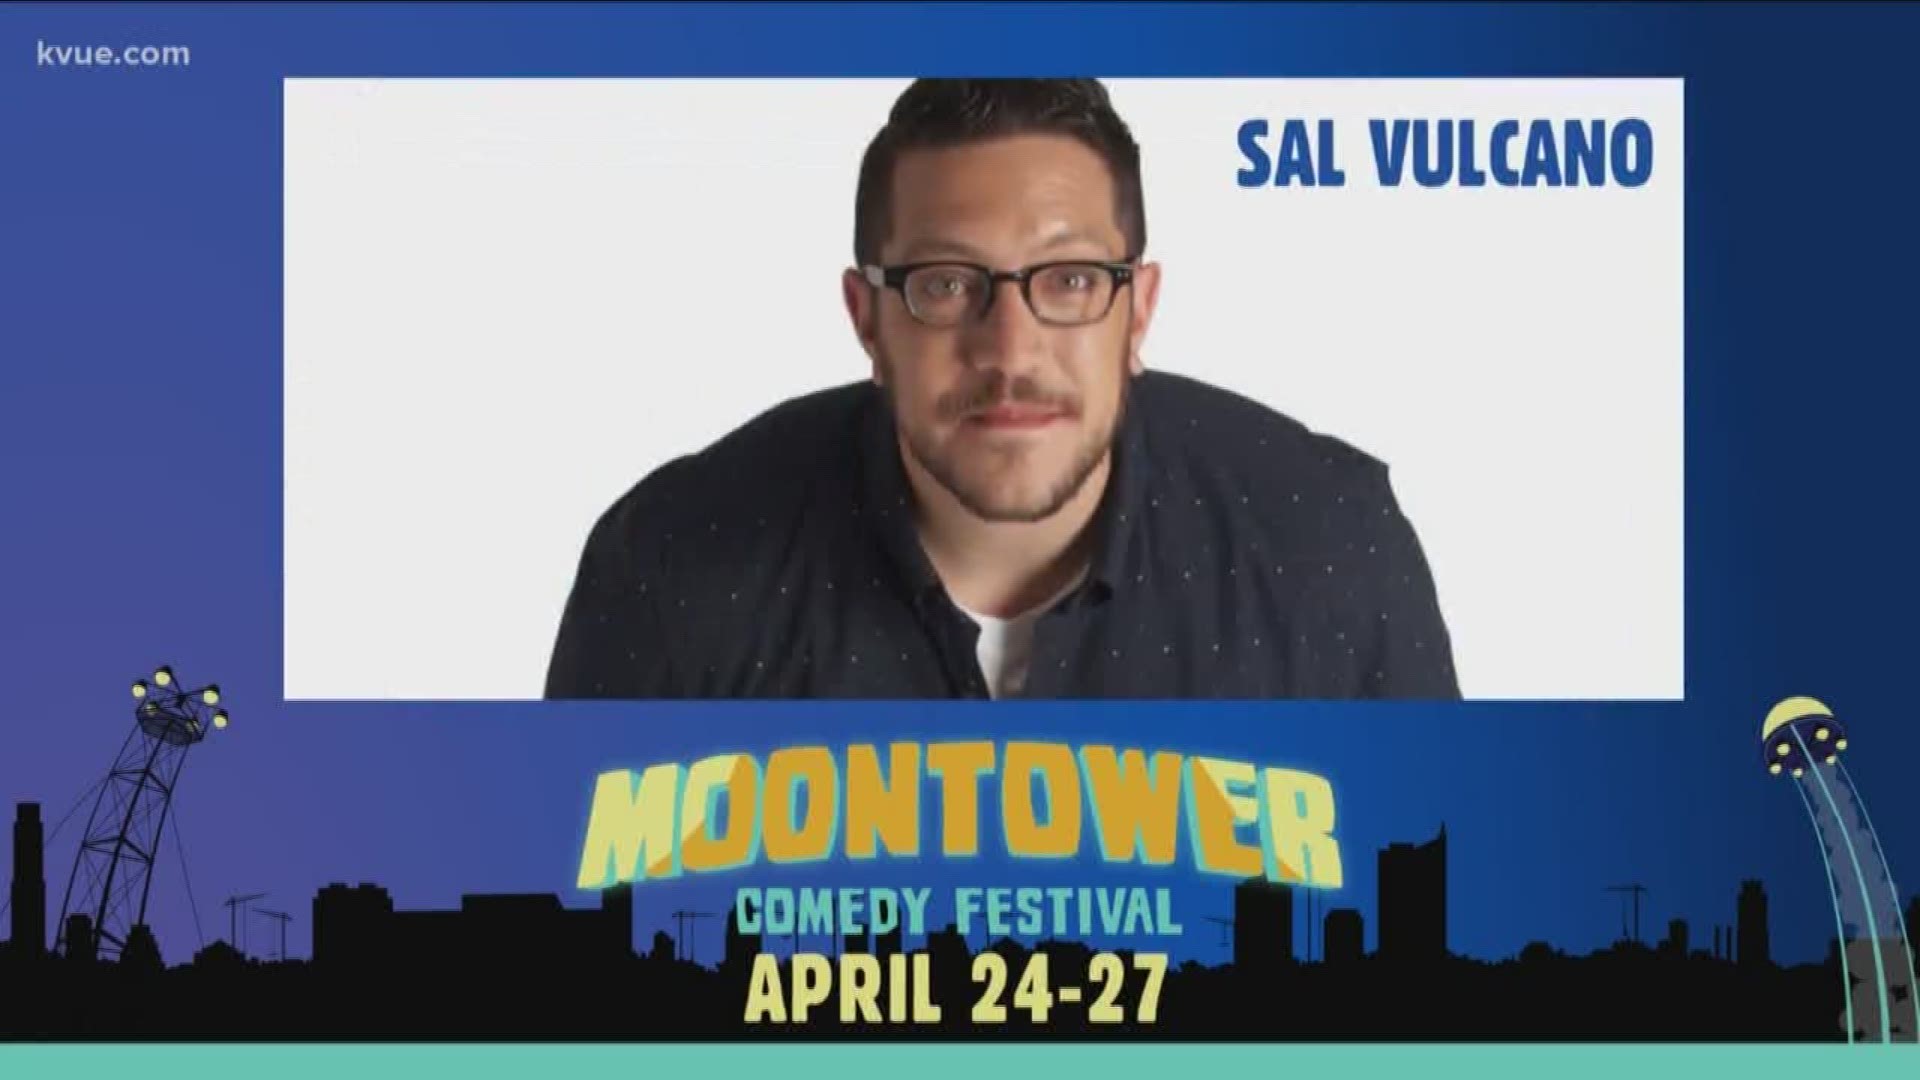 If you need a good laugh, the Moontower Comedy Festival kicks off Wednesday in Austin. Along with the headliners, you can catch performances by local comedians. Festival producer Leitza Brass and comedian Vanessa Gonzalez stopped by KVUE to talk about the event.